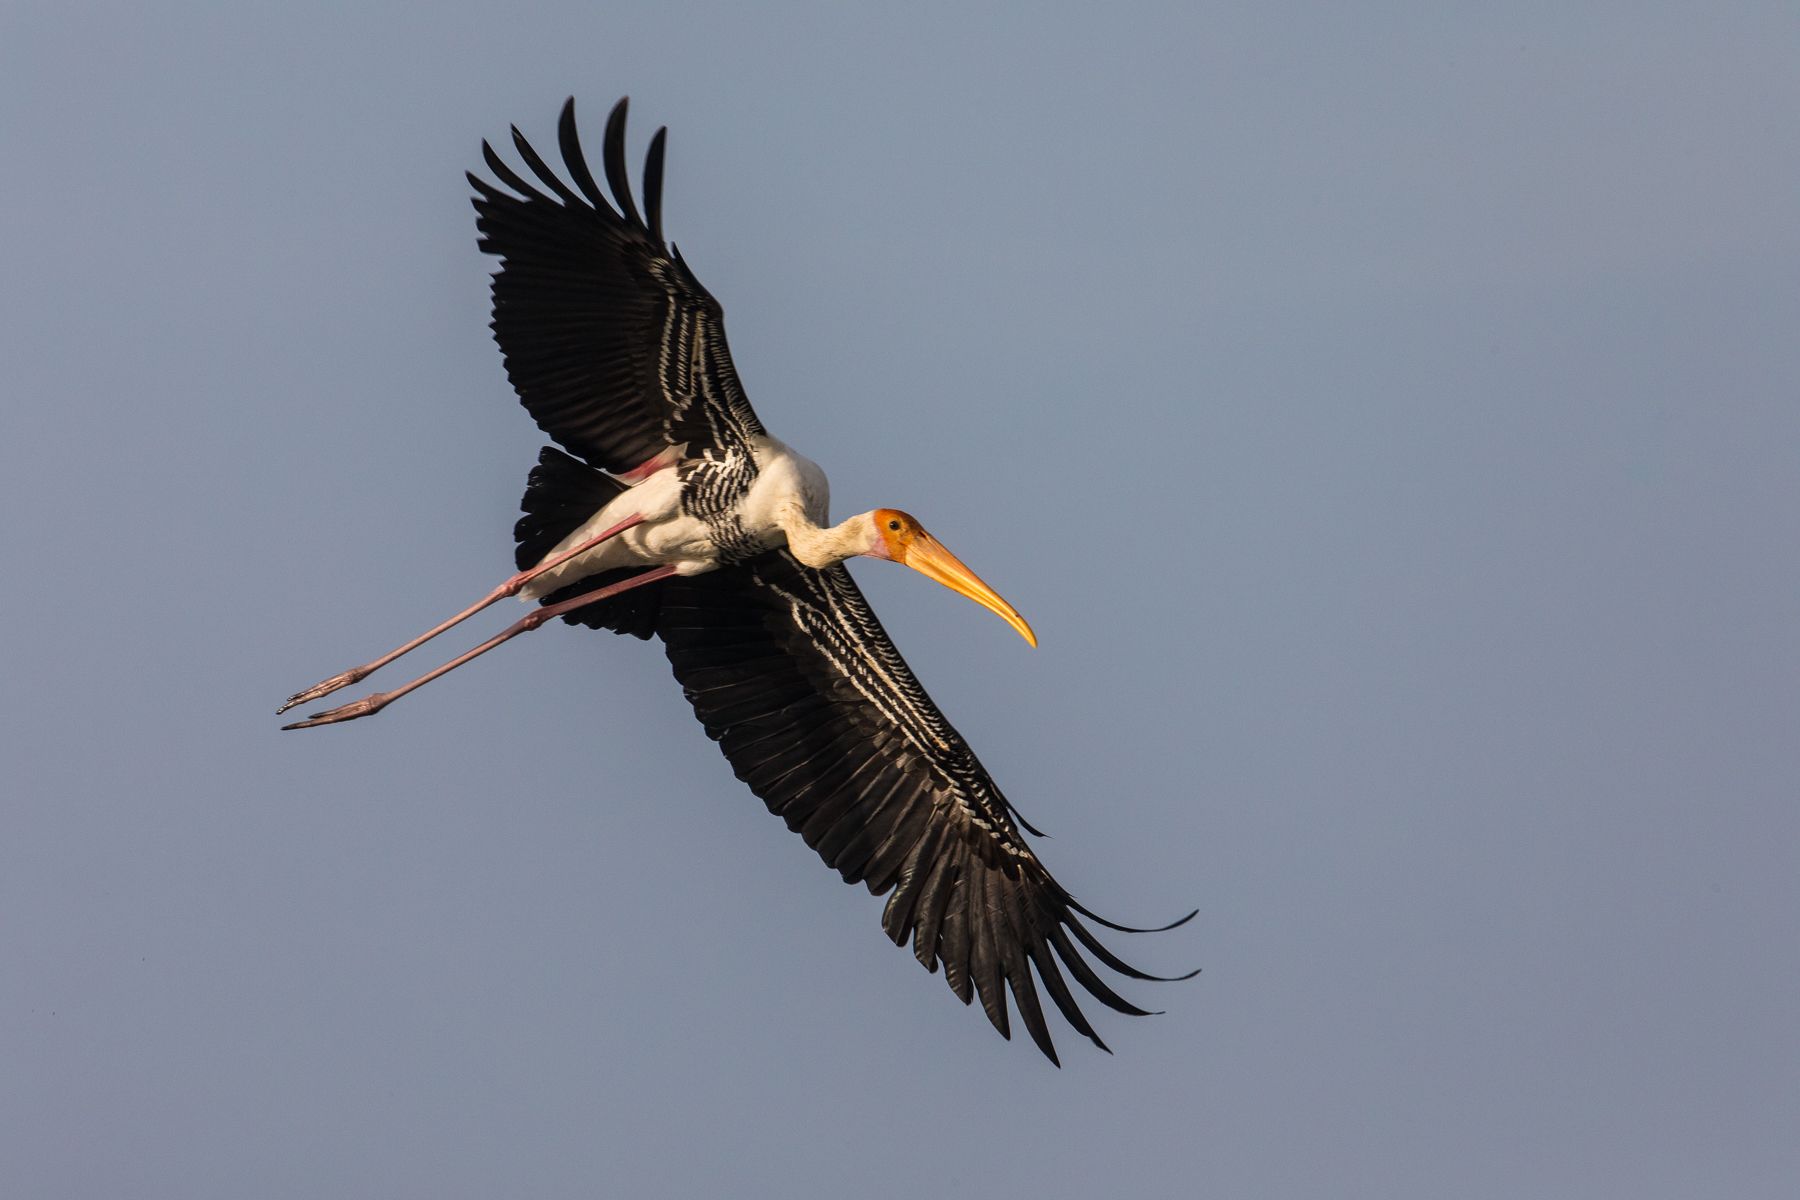 Painted Stork in flight on an India photography tours by Inger Vandyke